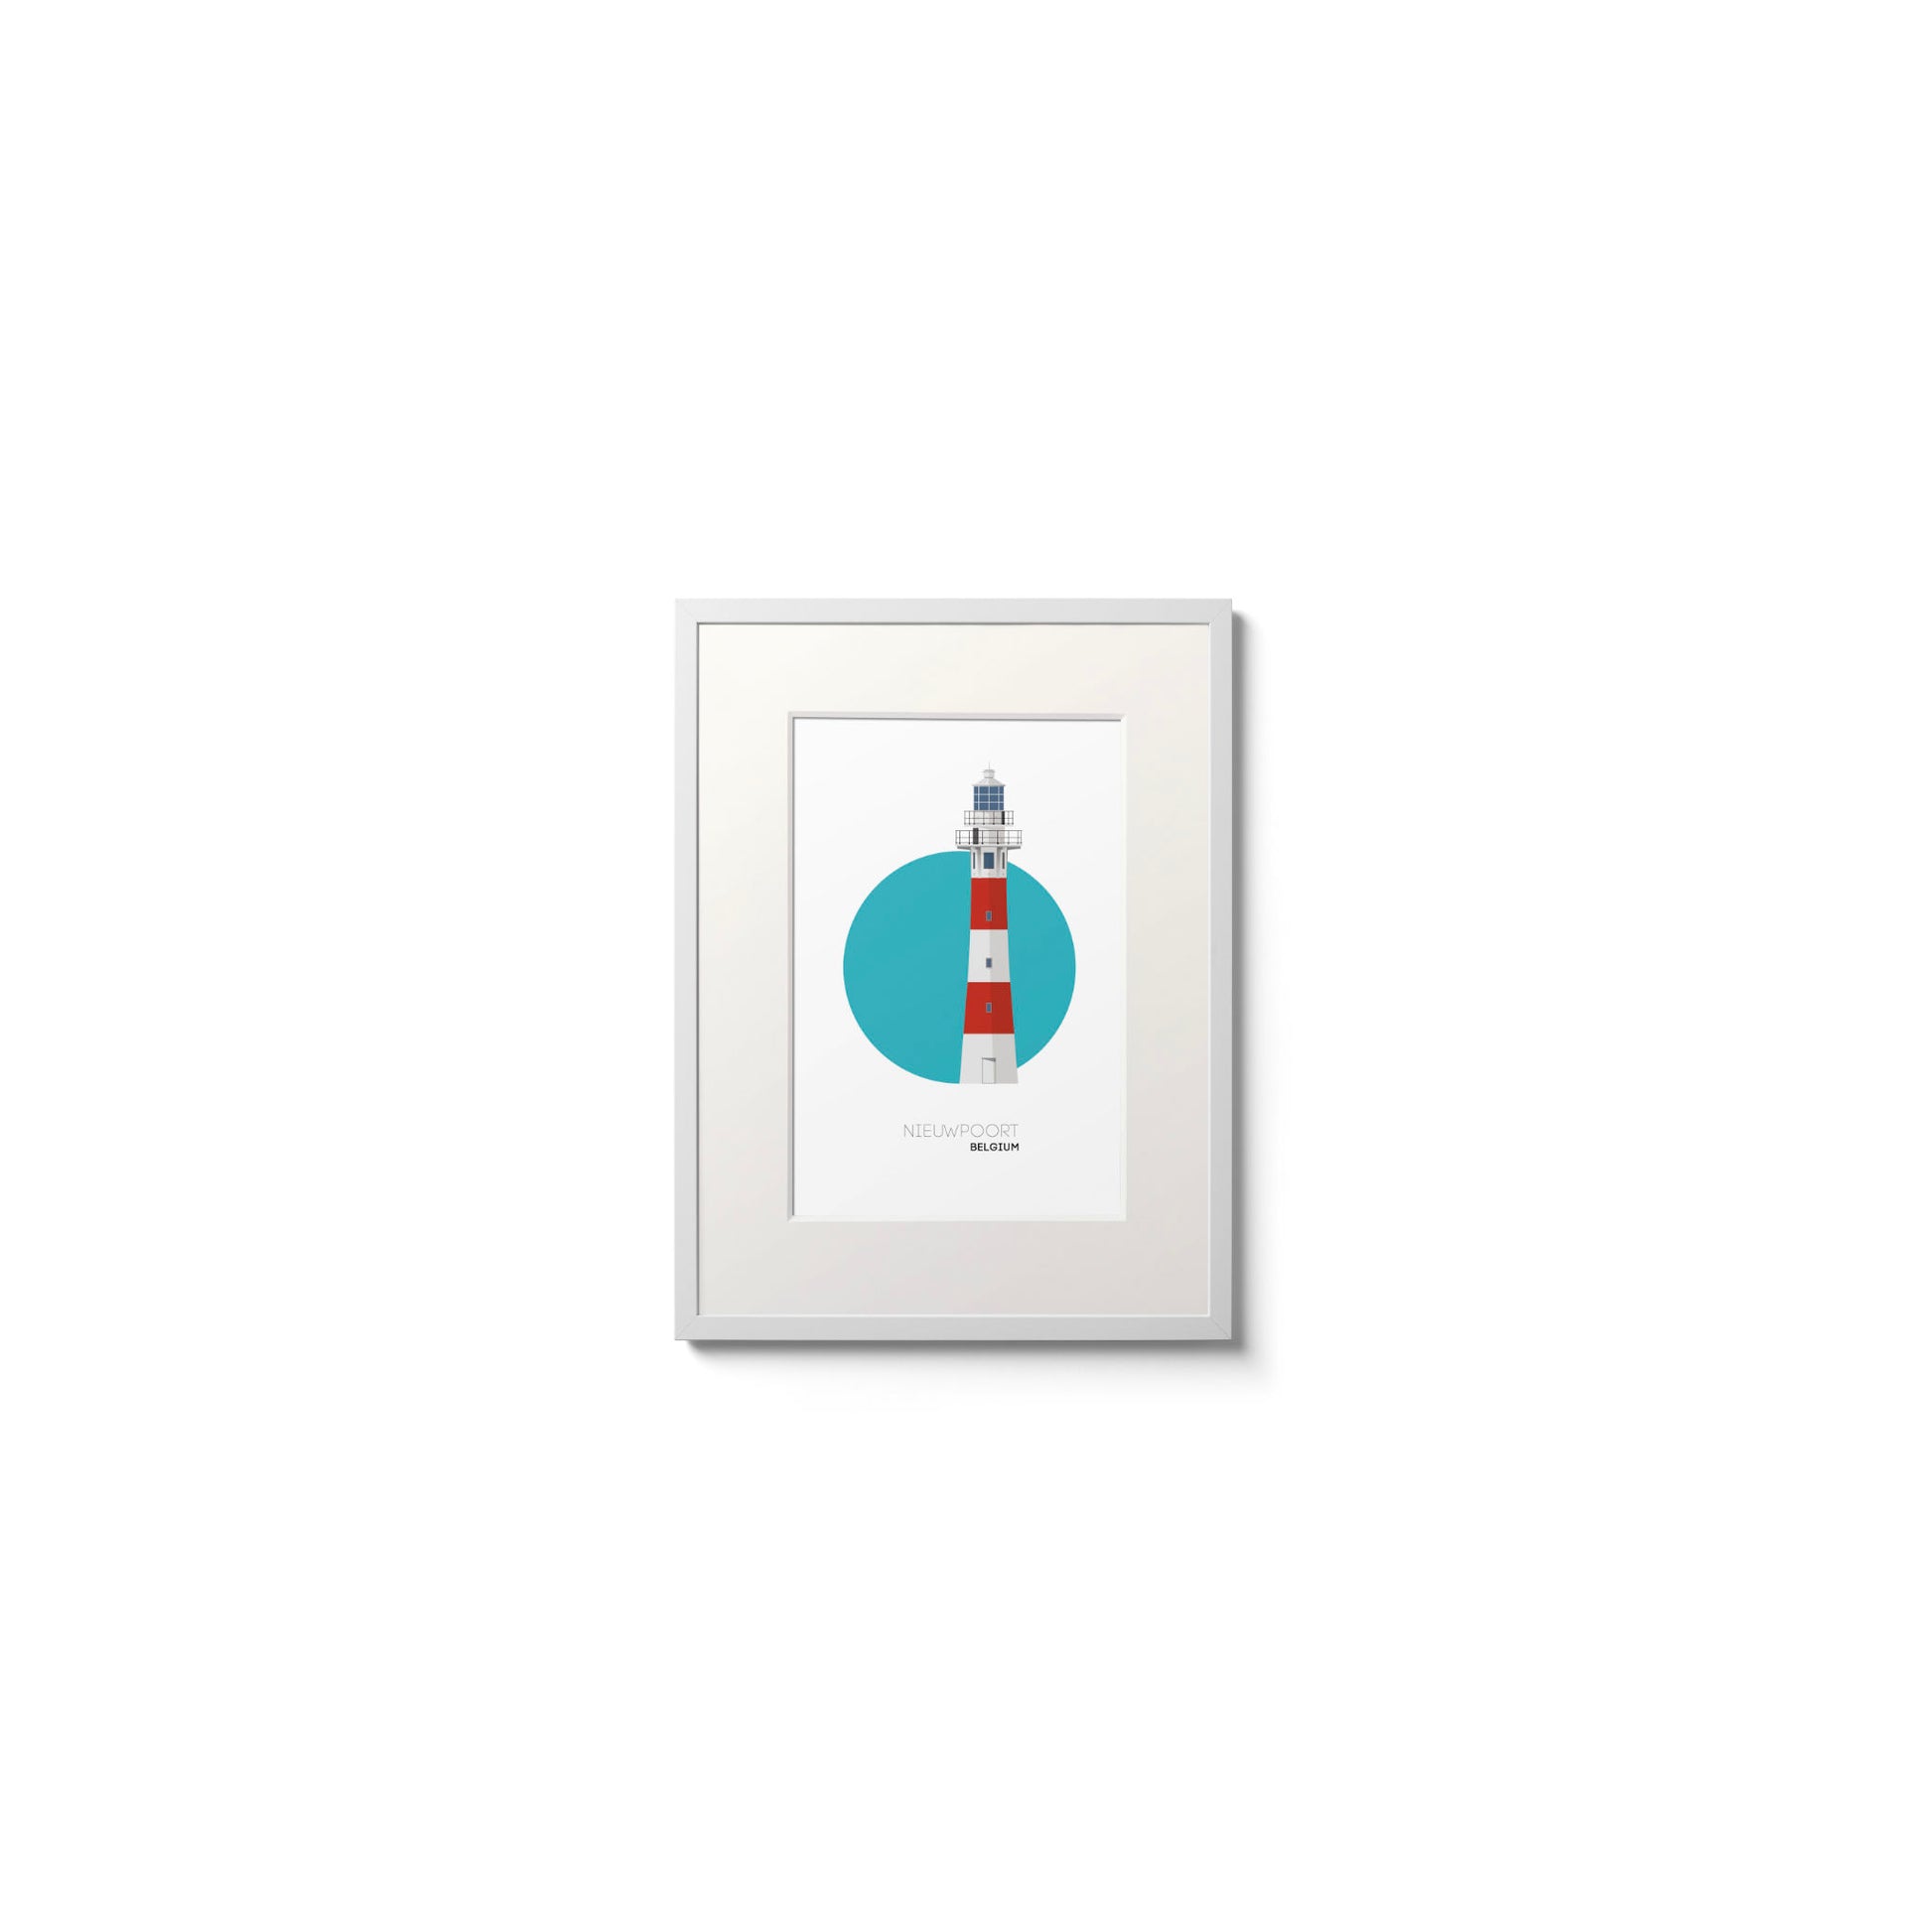 Illustration of the Nieuwpoort lighthouse, Belgium. On a white background with aqua blue circle as a backdrop, framed and measuring 15x20cm.